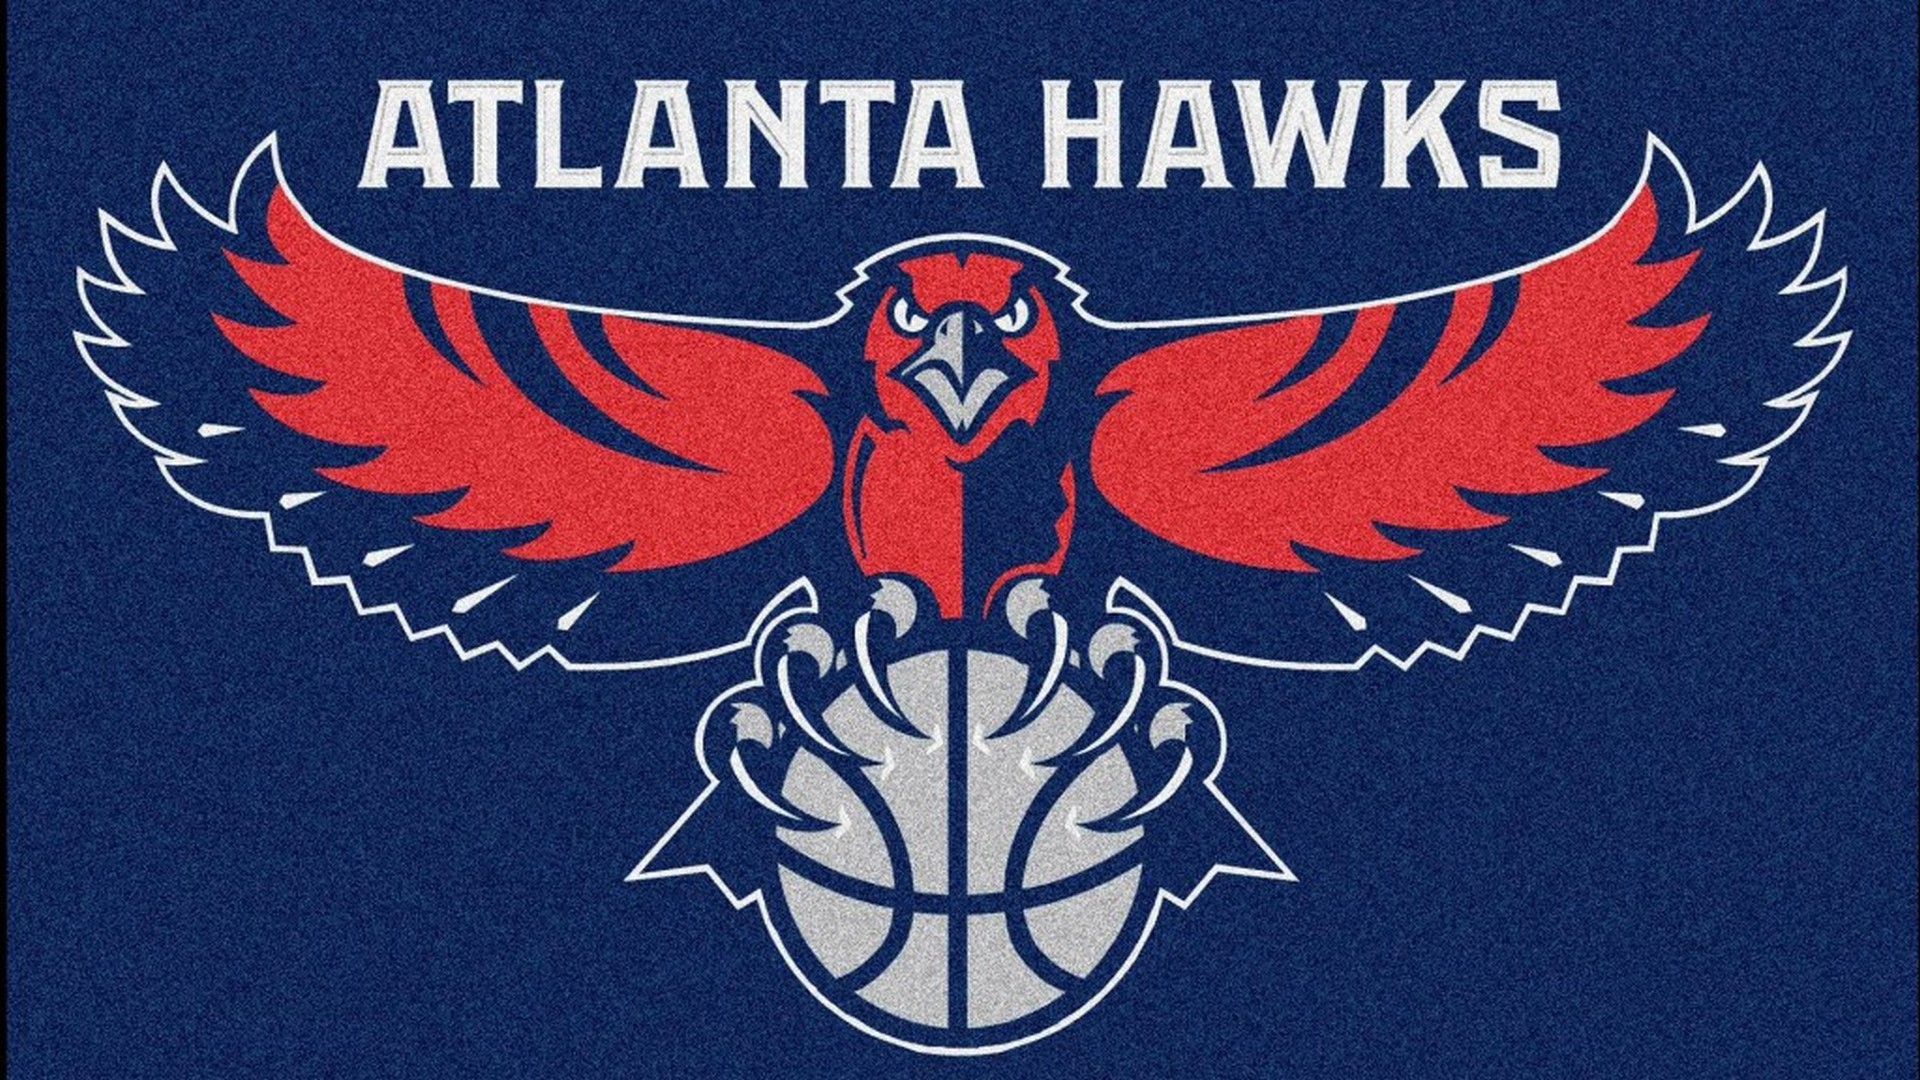 Atlanta Hawks For PC Wallpaper with image dimensions 1920x1080 pixel. You can make this wallpaper for your Desktop Computer Backgrounds, Windows or Mac Screensavers, iPhone Lock screen, Tablet or Android and another Mobile Phone device